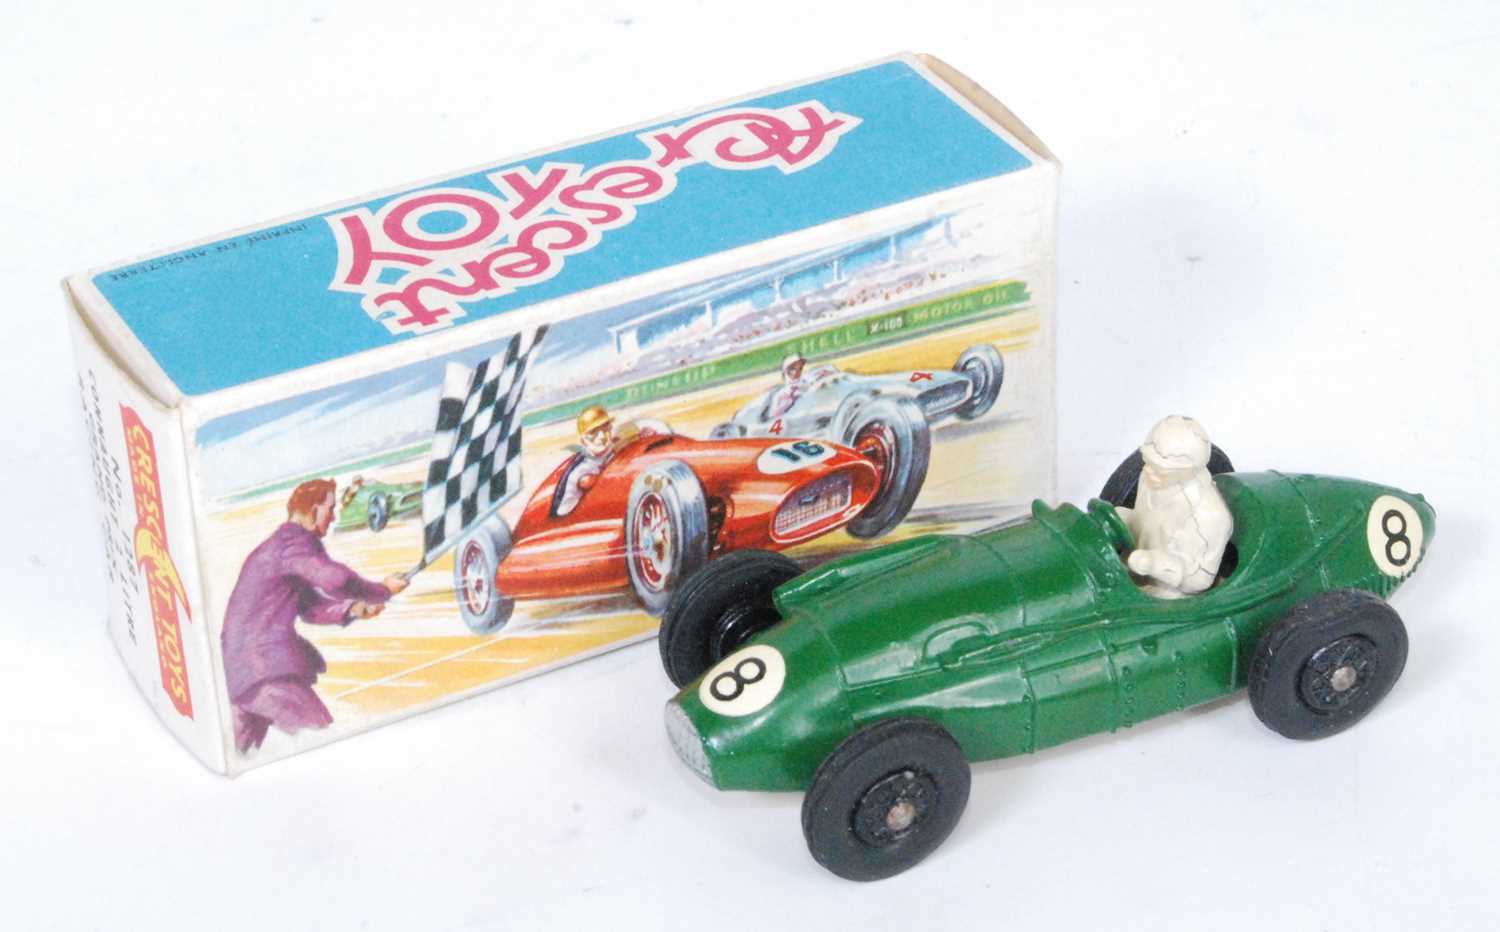 A Crescent Toys No.1287 Connaught 2 litre Grand Prix racing car, comprising green body with racing